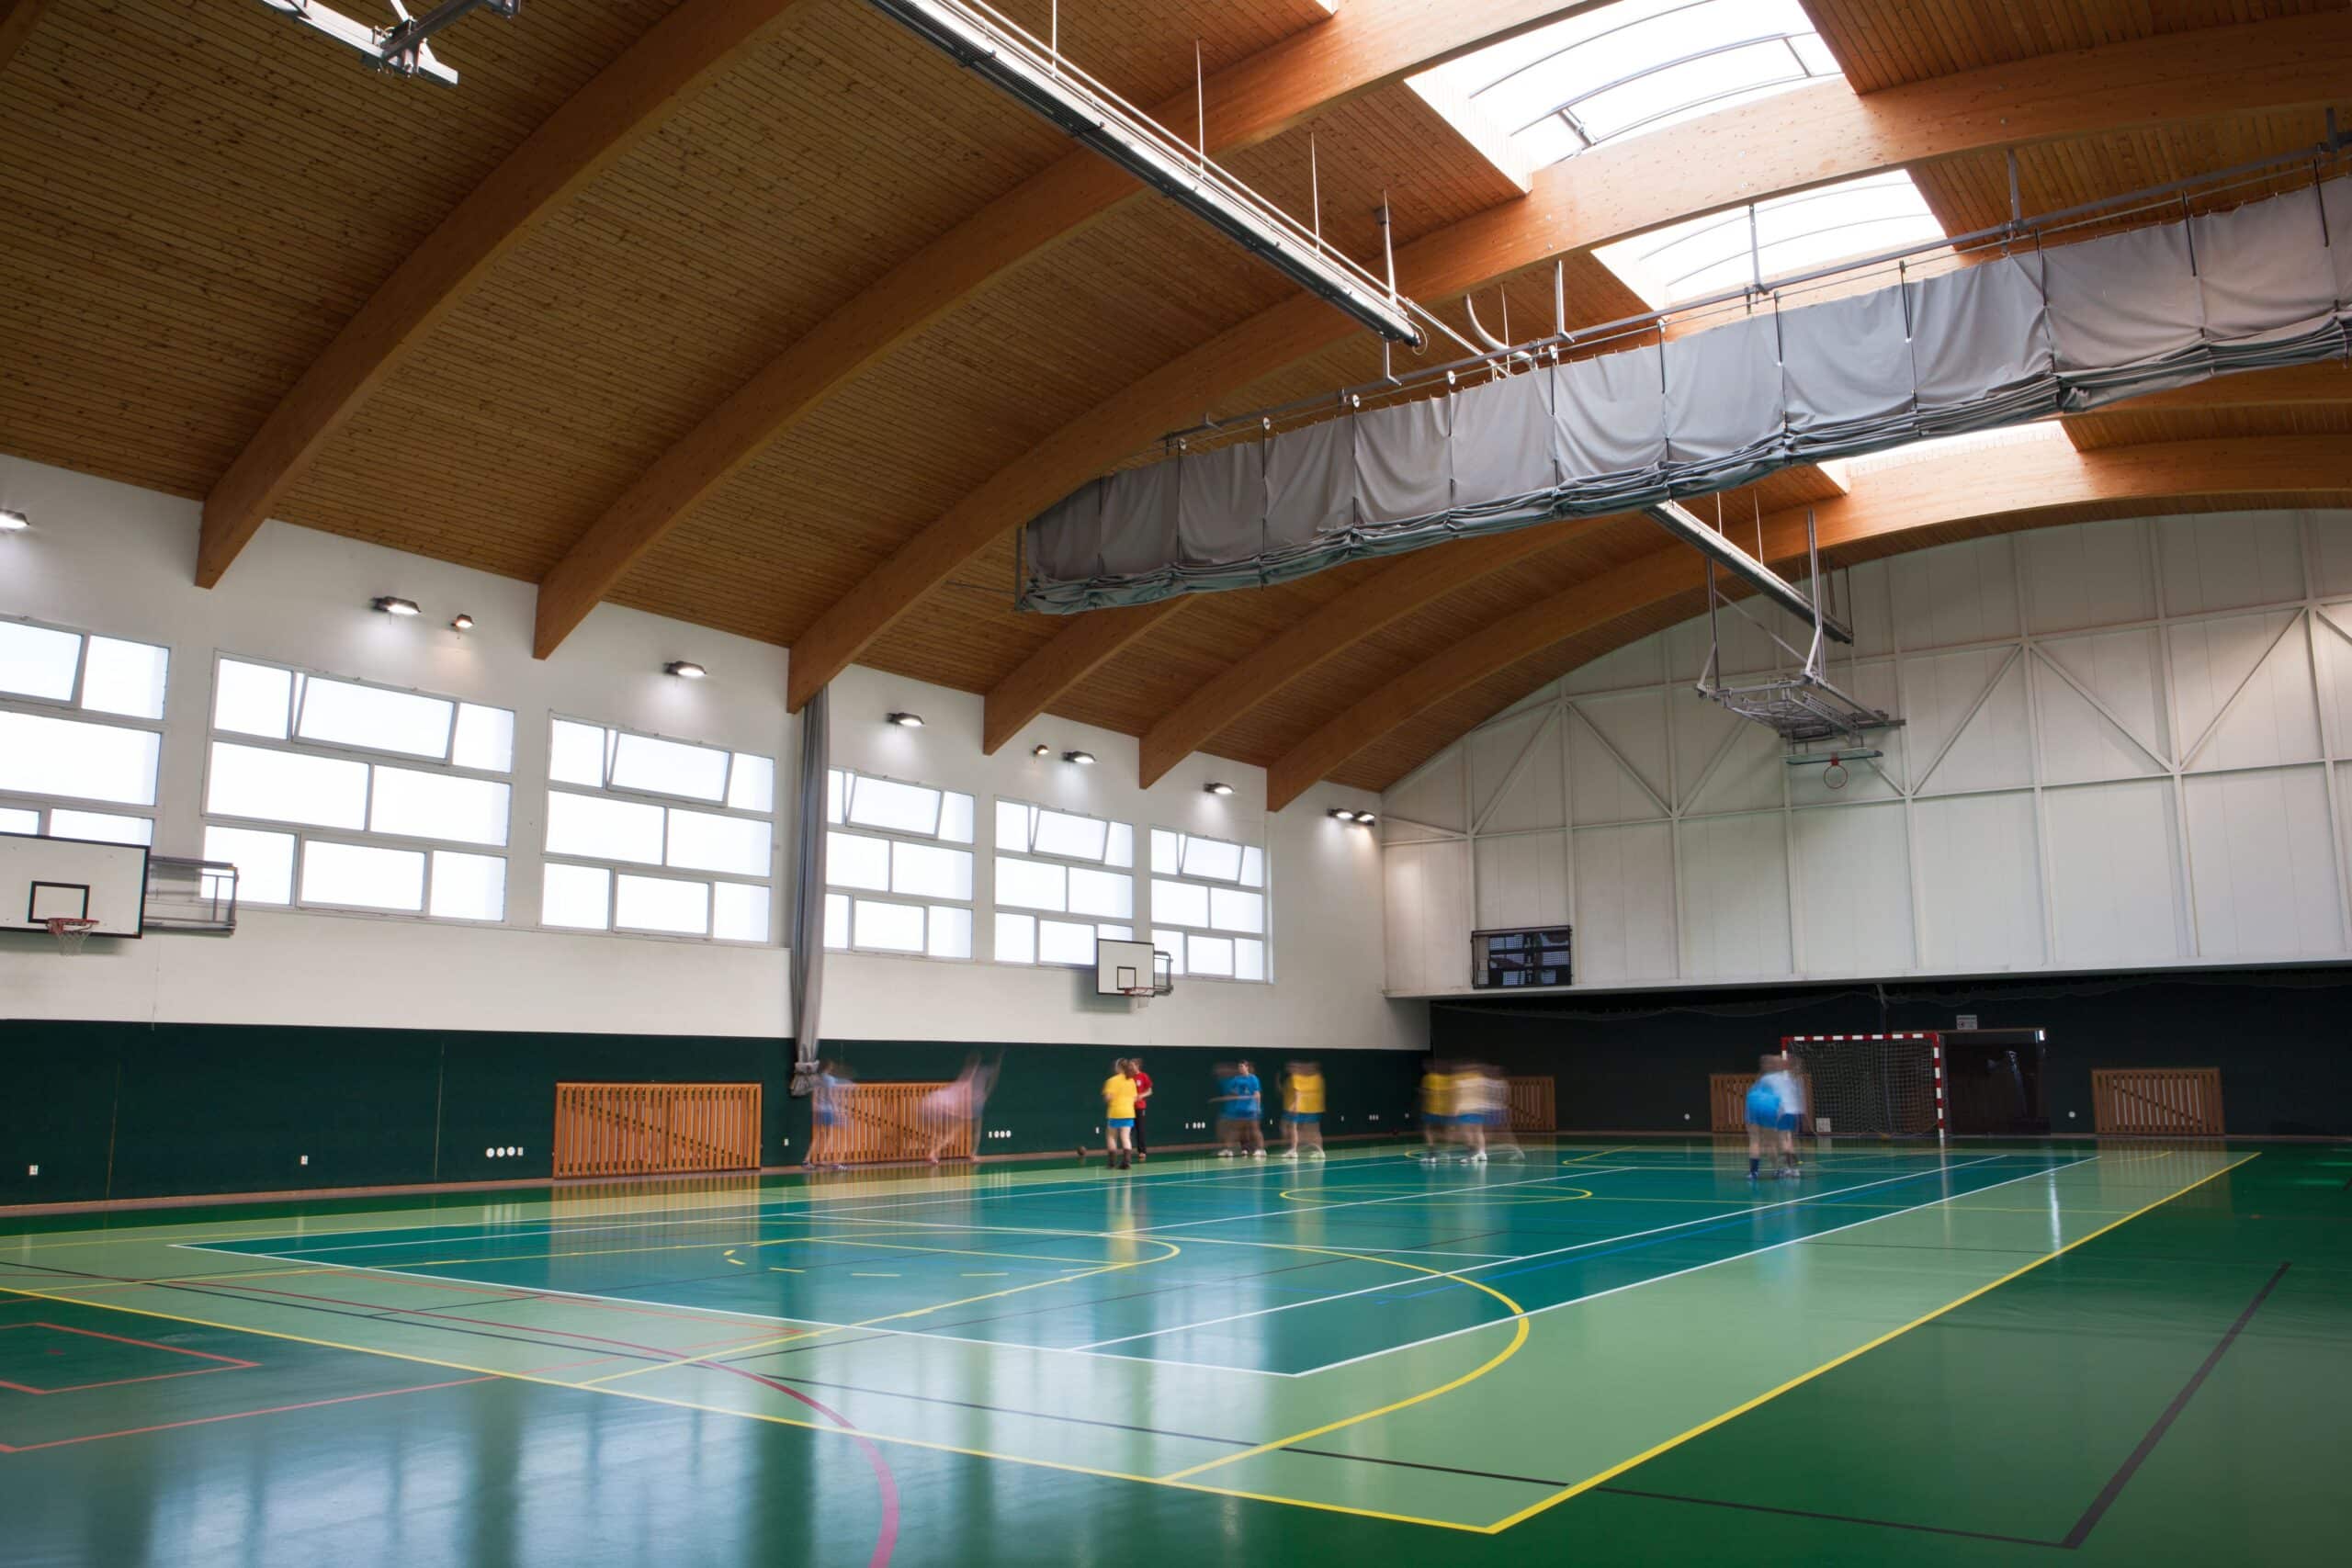 Large gymnasium with clean flooring